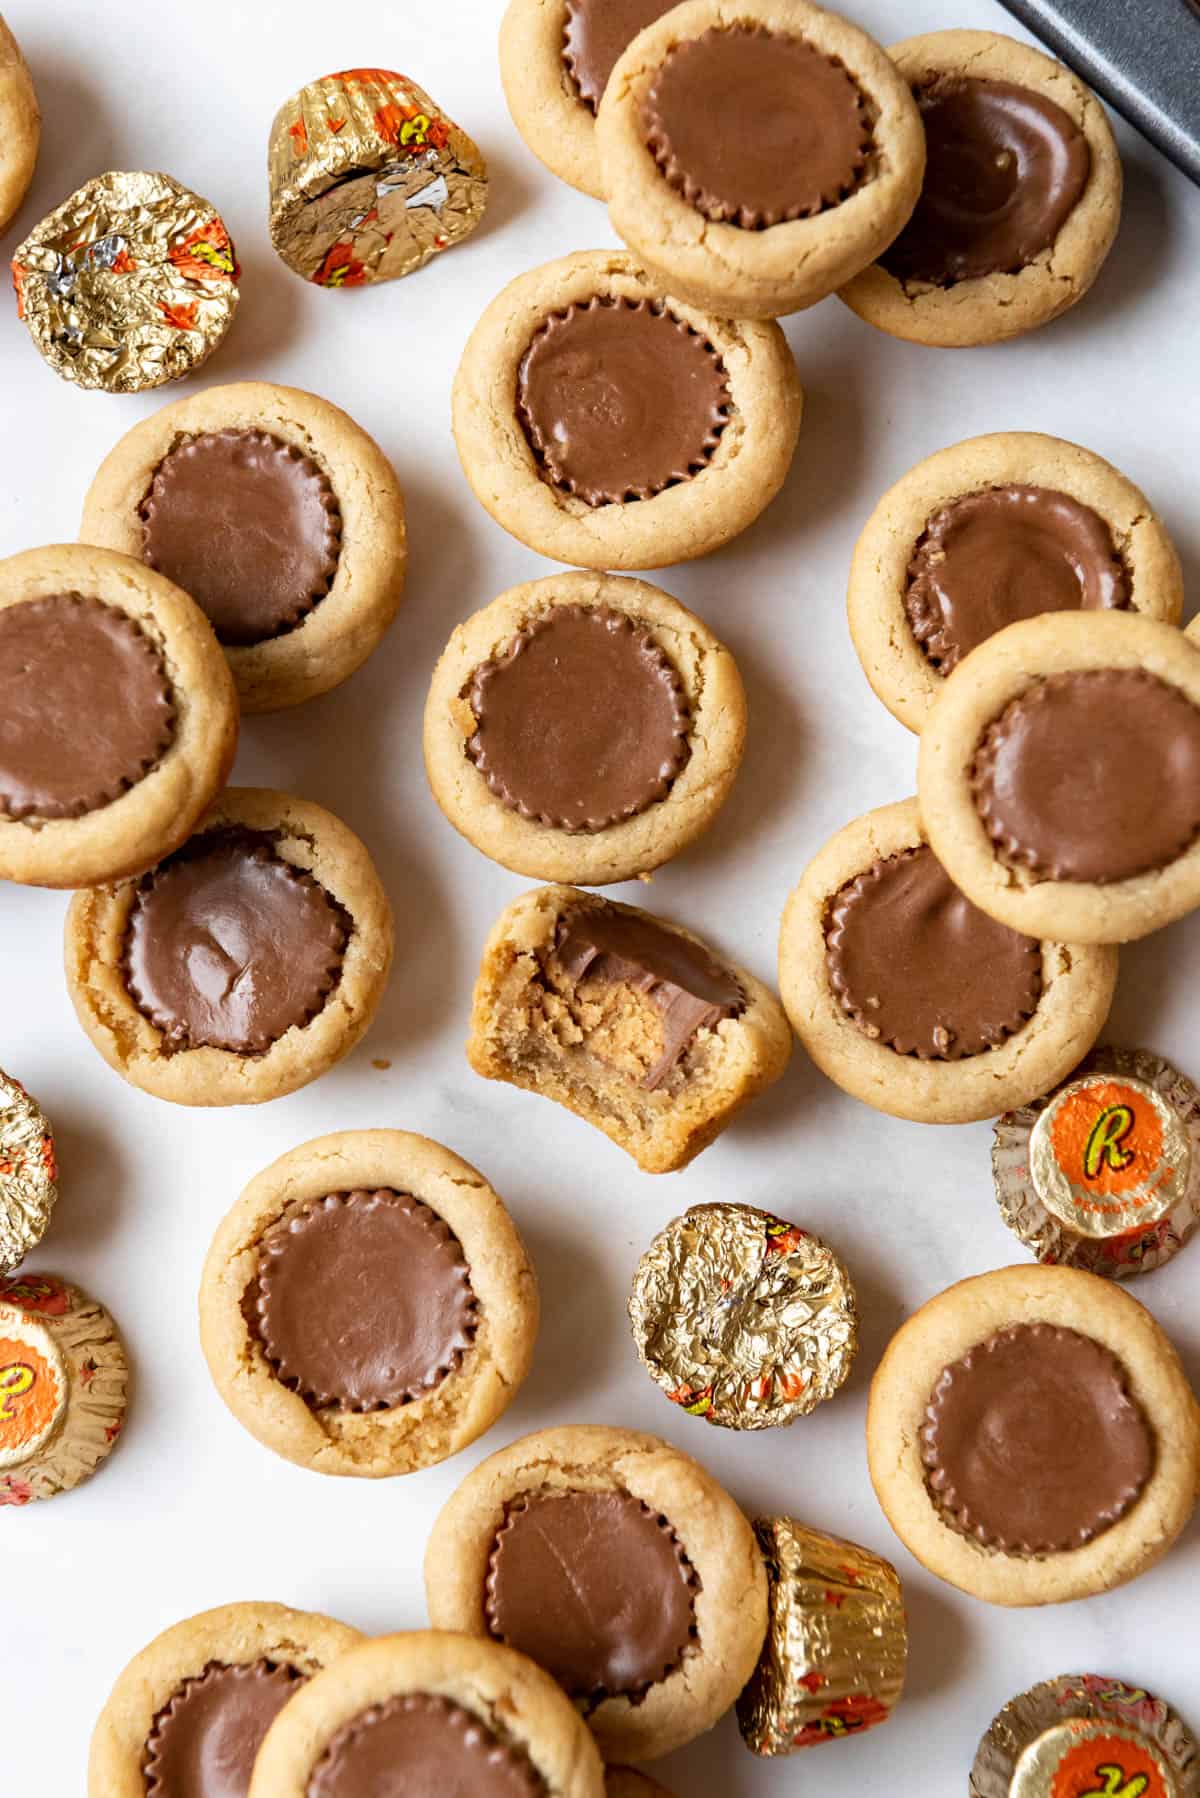 Peanut Butter Cup Cookies with a bite taken out of one of them and some wrapped mini Reese's peanut butter cups scattered around them.